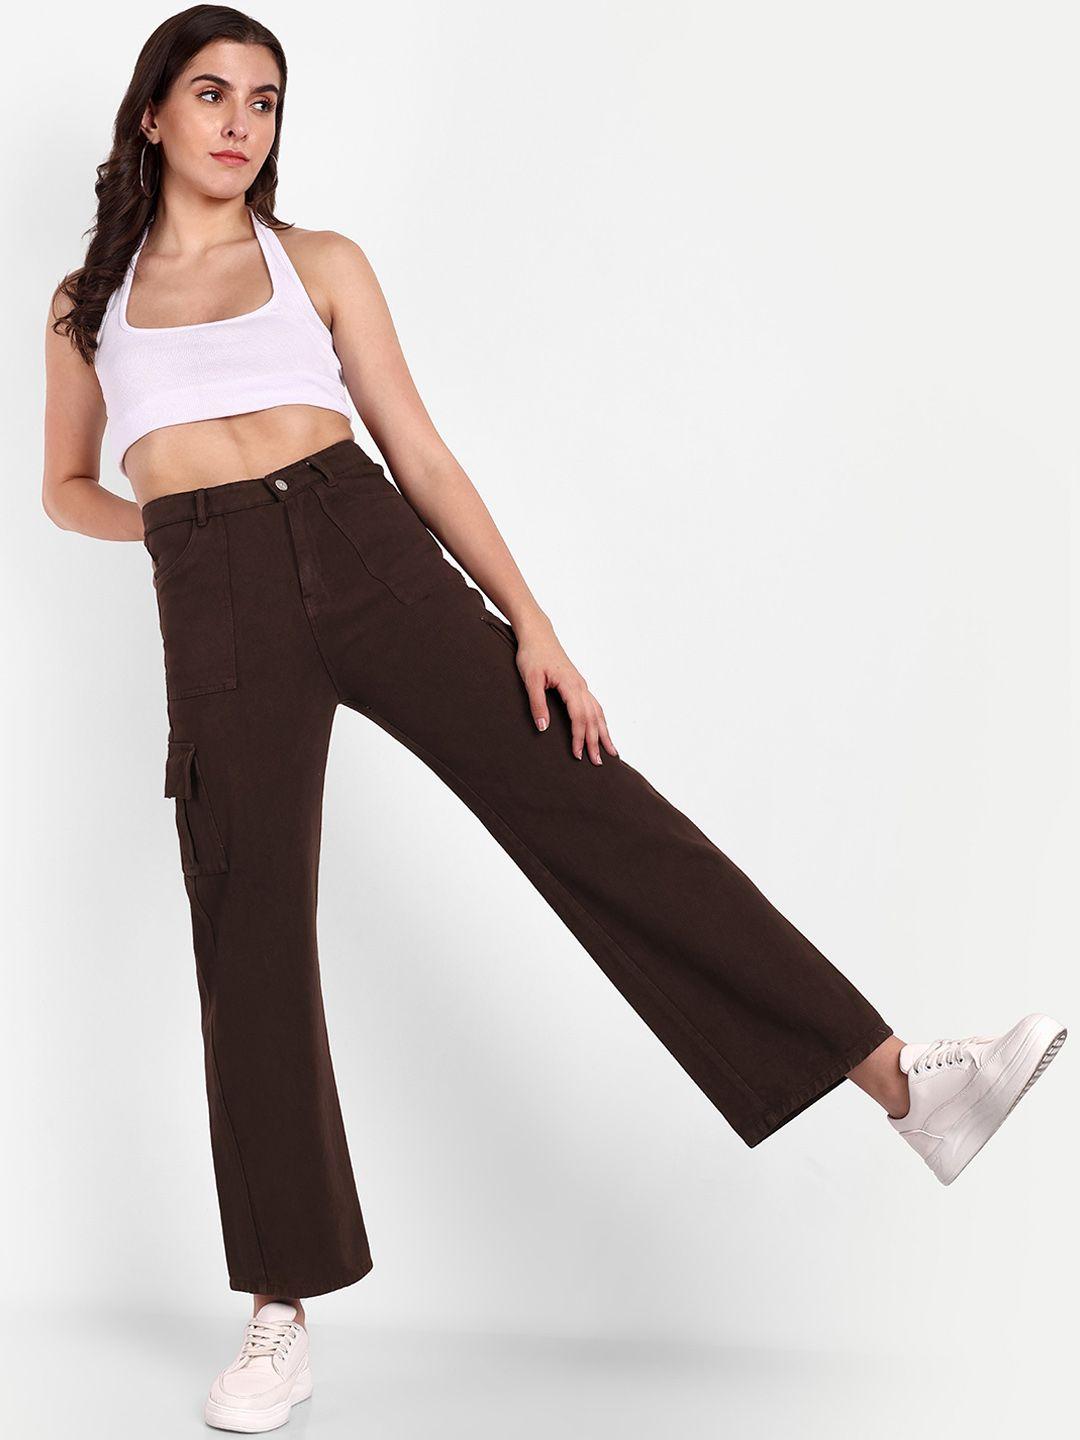 next-one-women-brown-smart-wide-leg-high-rise-mildly-distressed-stretchable-jeans